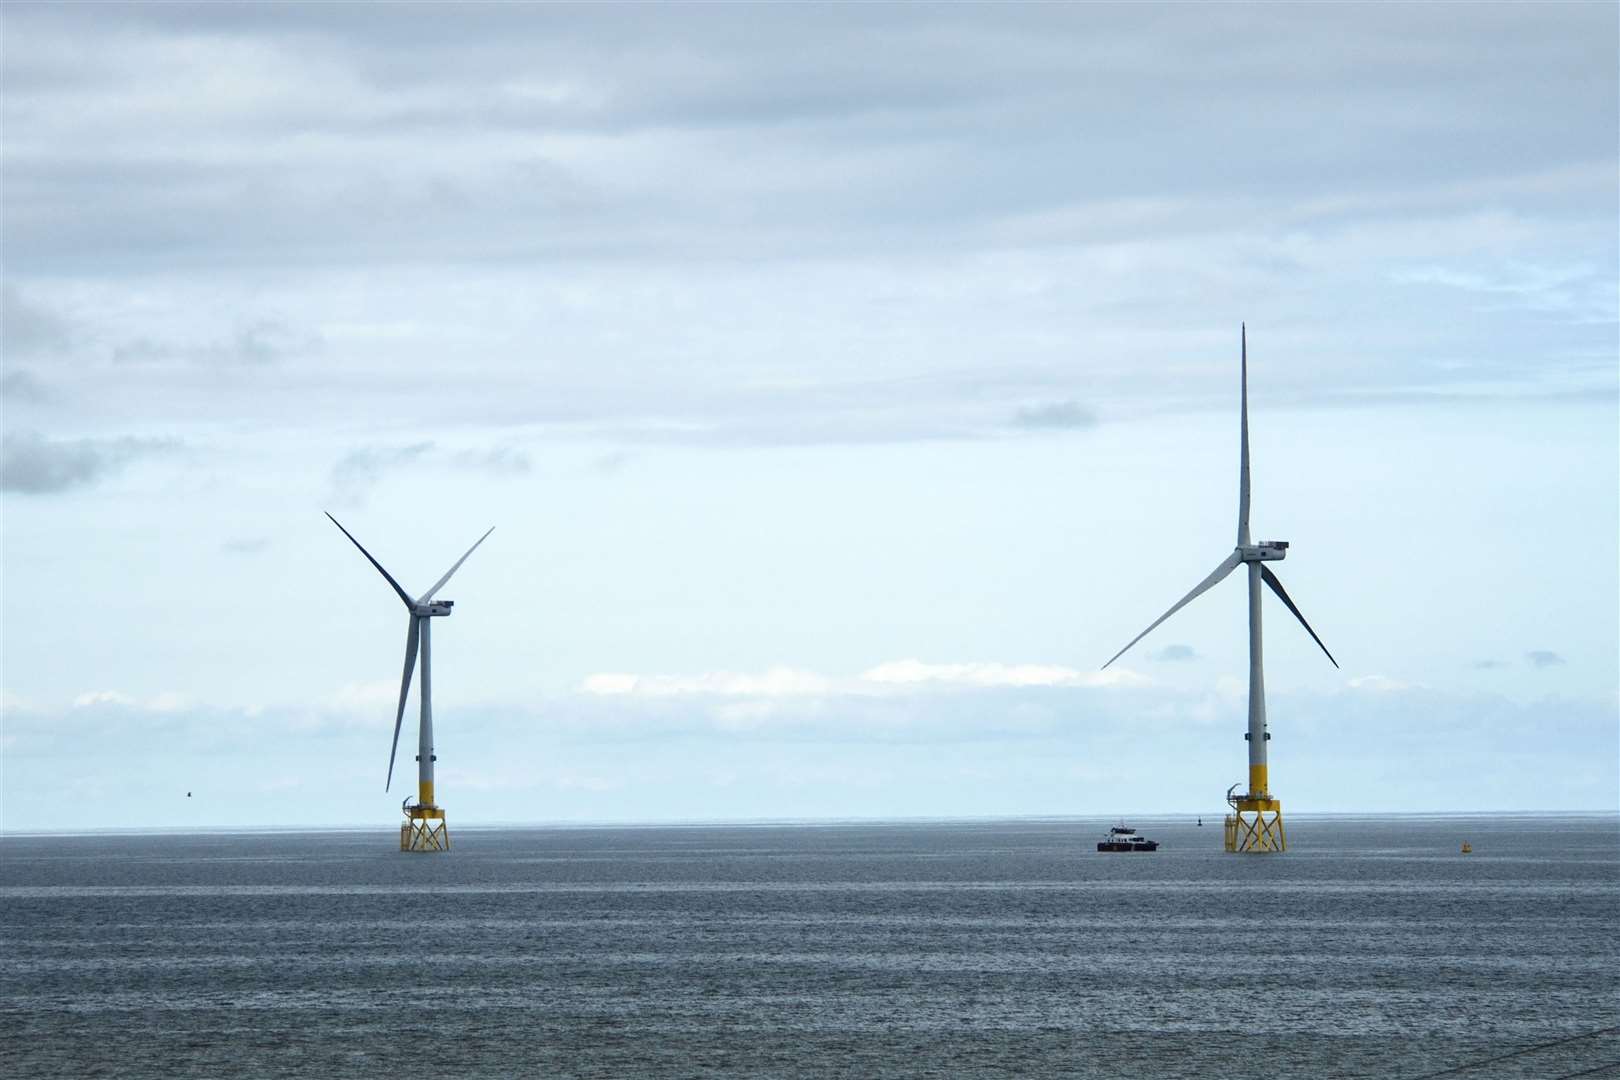 The UK’s Offshore Wind Sector Deal has a commitment to grow UK content of offshore wind to 60 per cent.